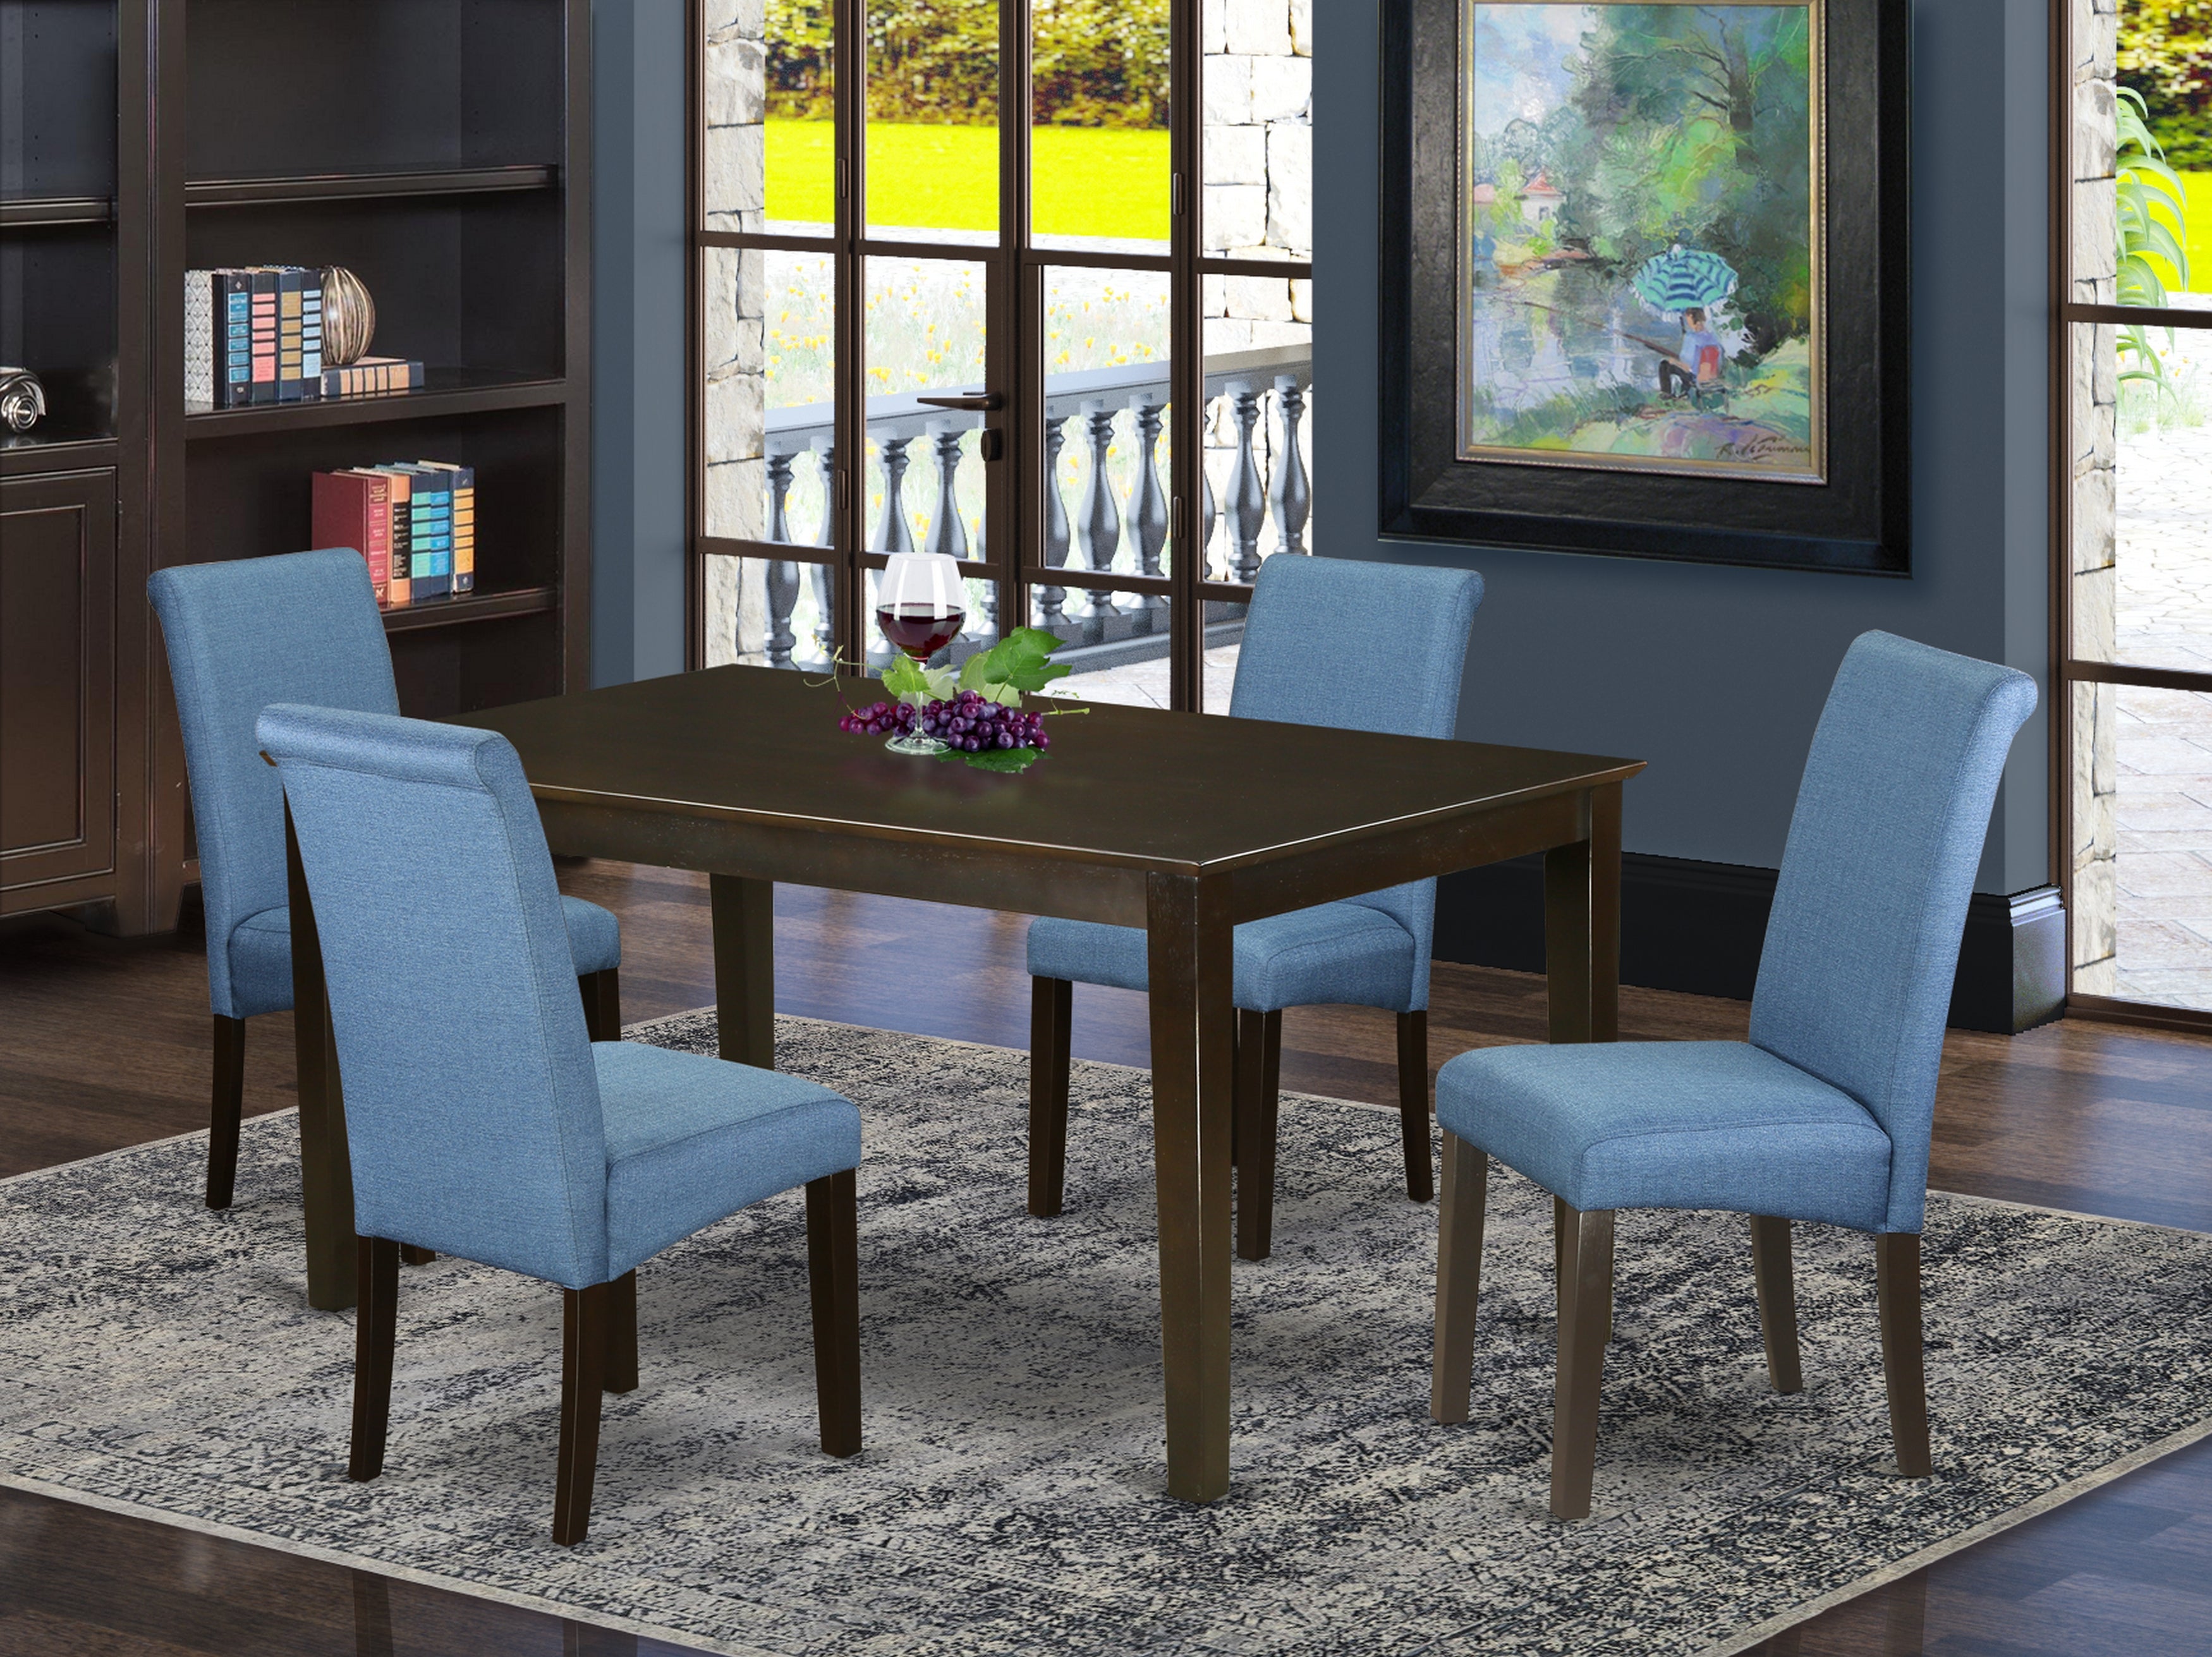 CABA5-CAP-21 5Pc Kitchen table with linen Blue fabric Parson chairs with cappuccino chair legs